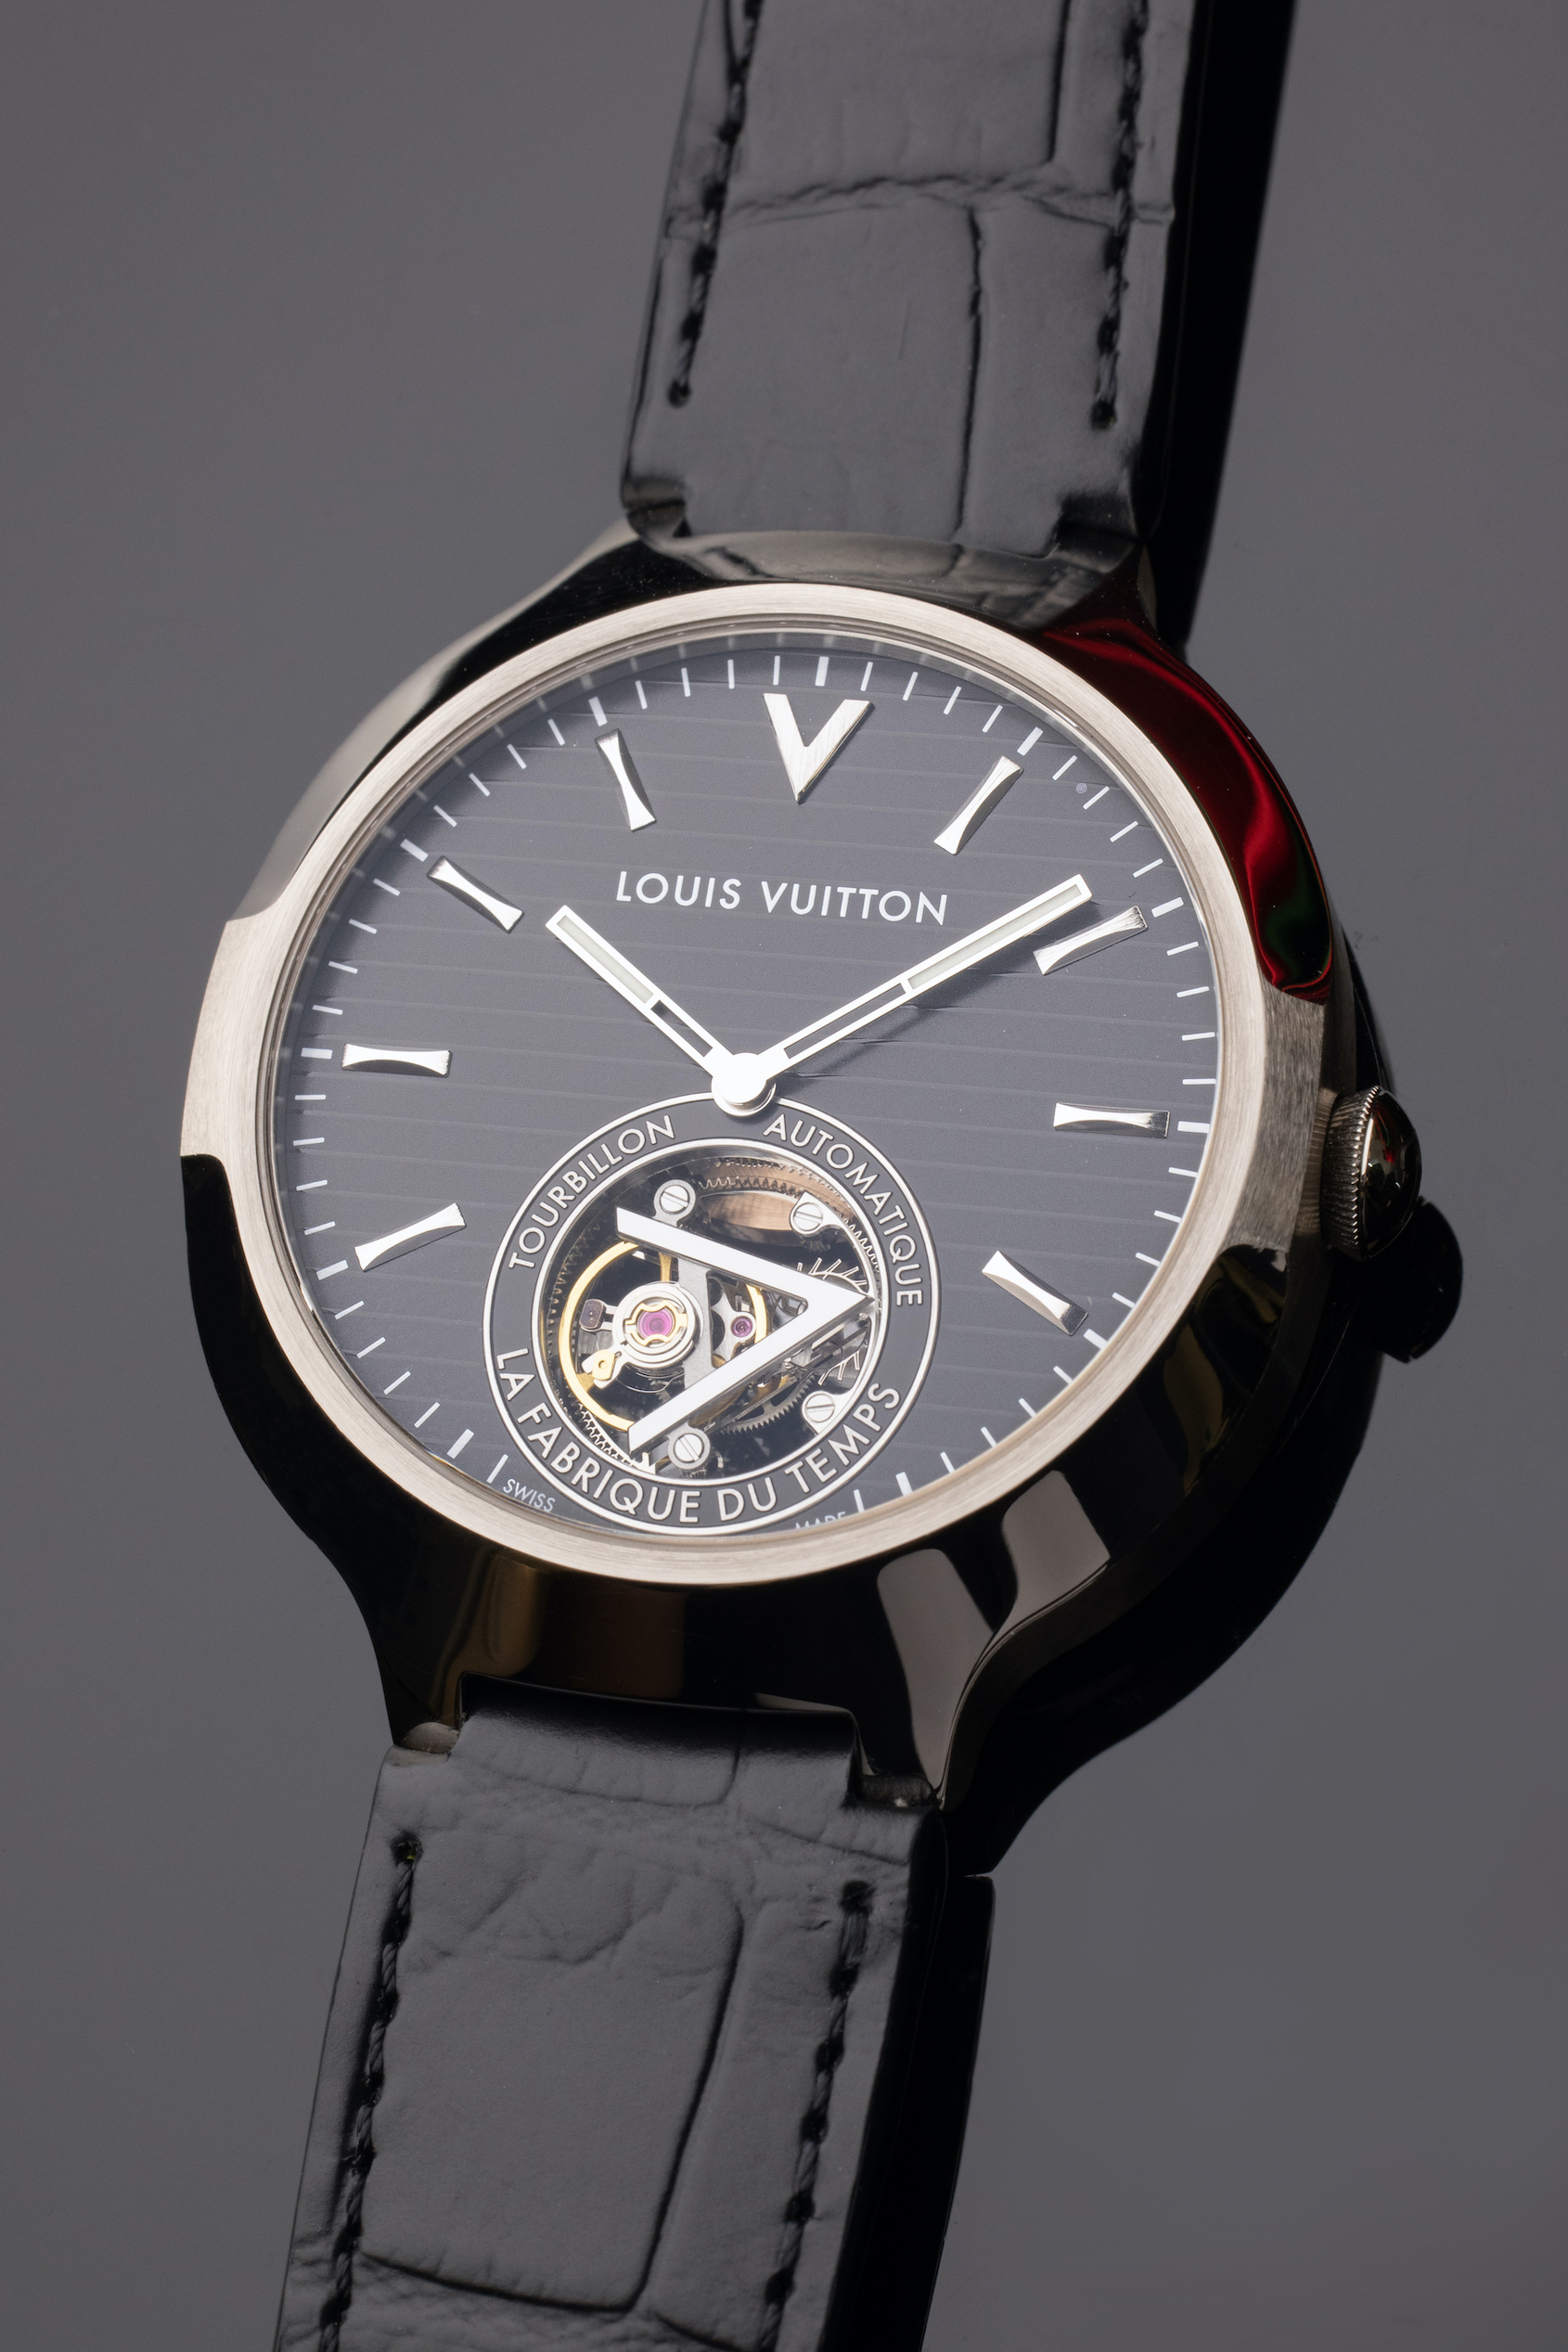 The Louis Vuitton 2020 Collection delivers flying tourbillons, gem-set  cases and some very special spinning cubes